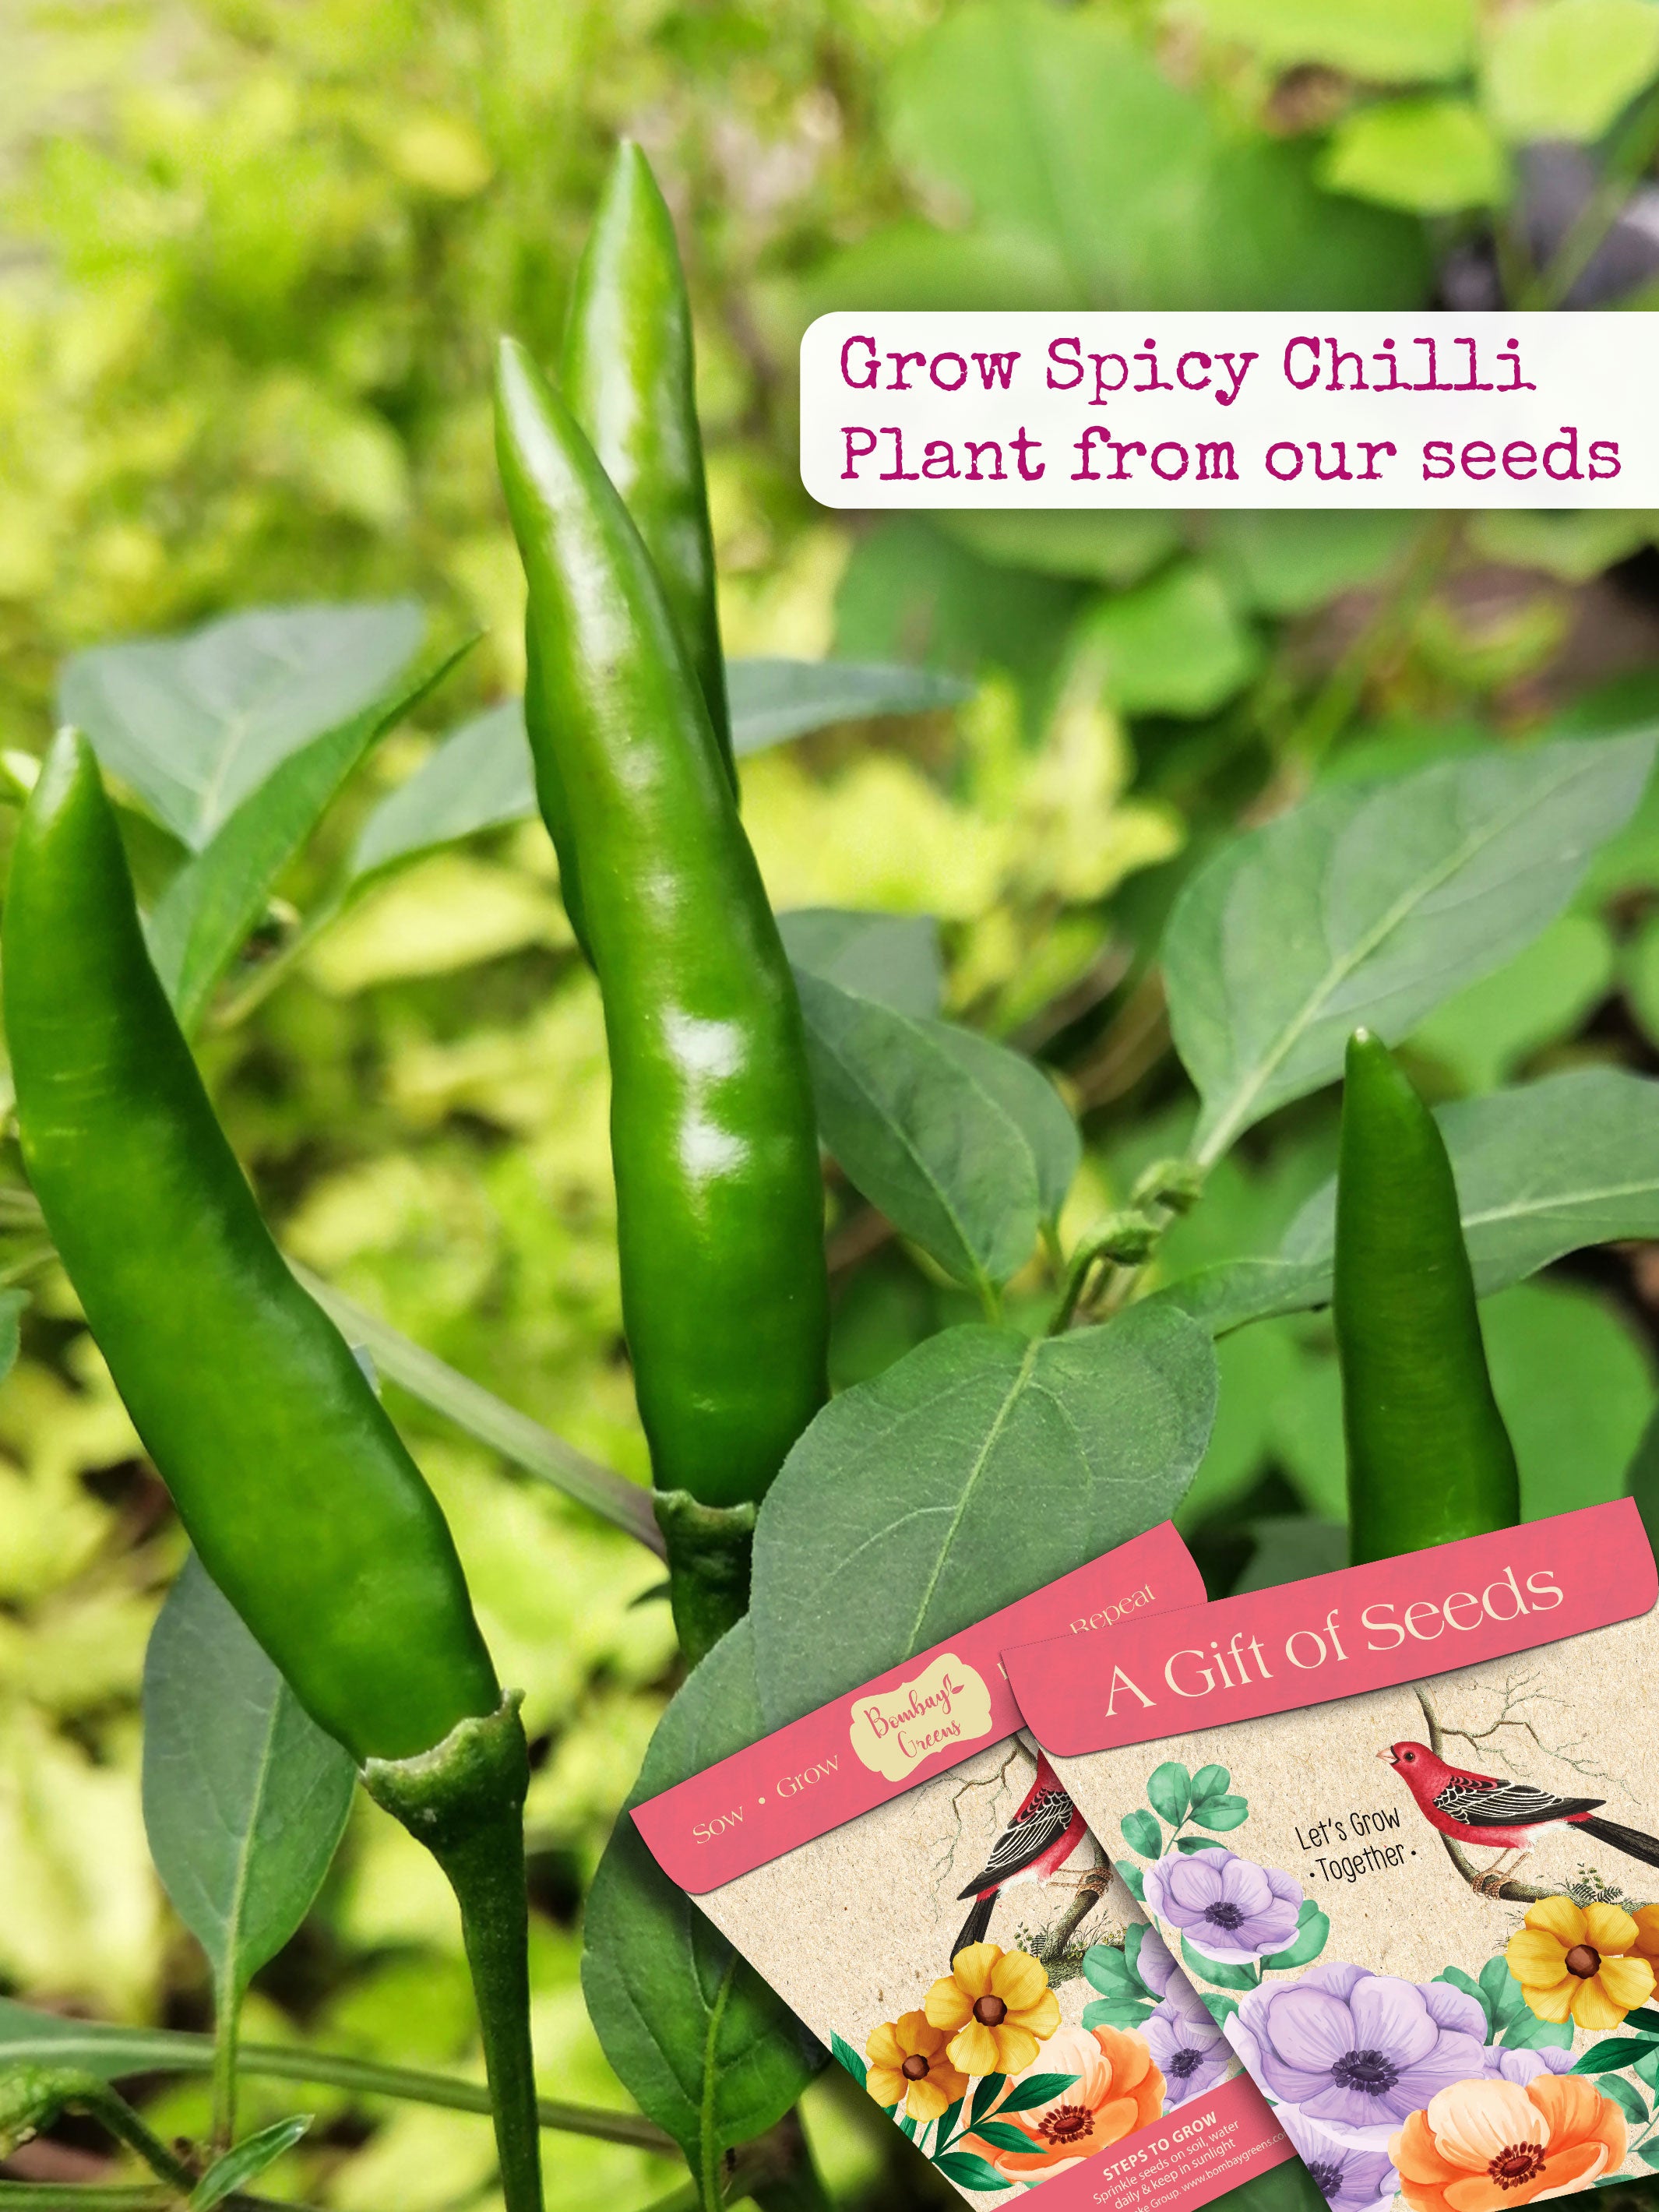 Gift of seeds-Spicy chilli seeds